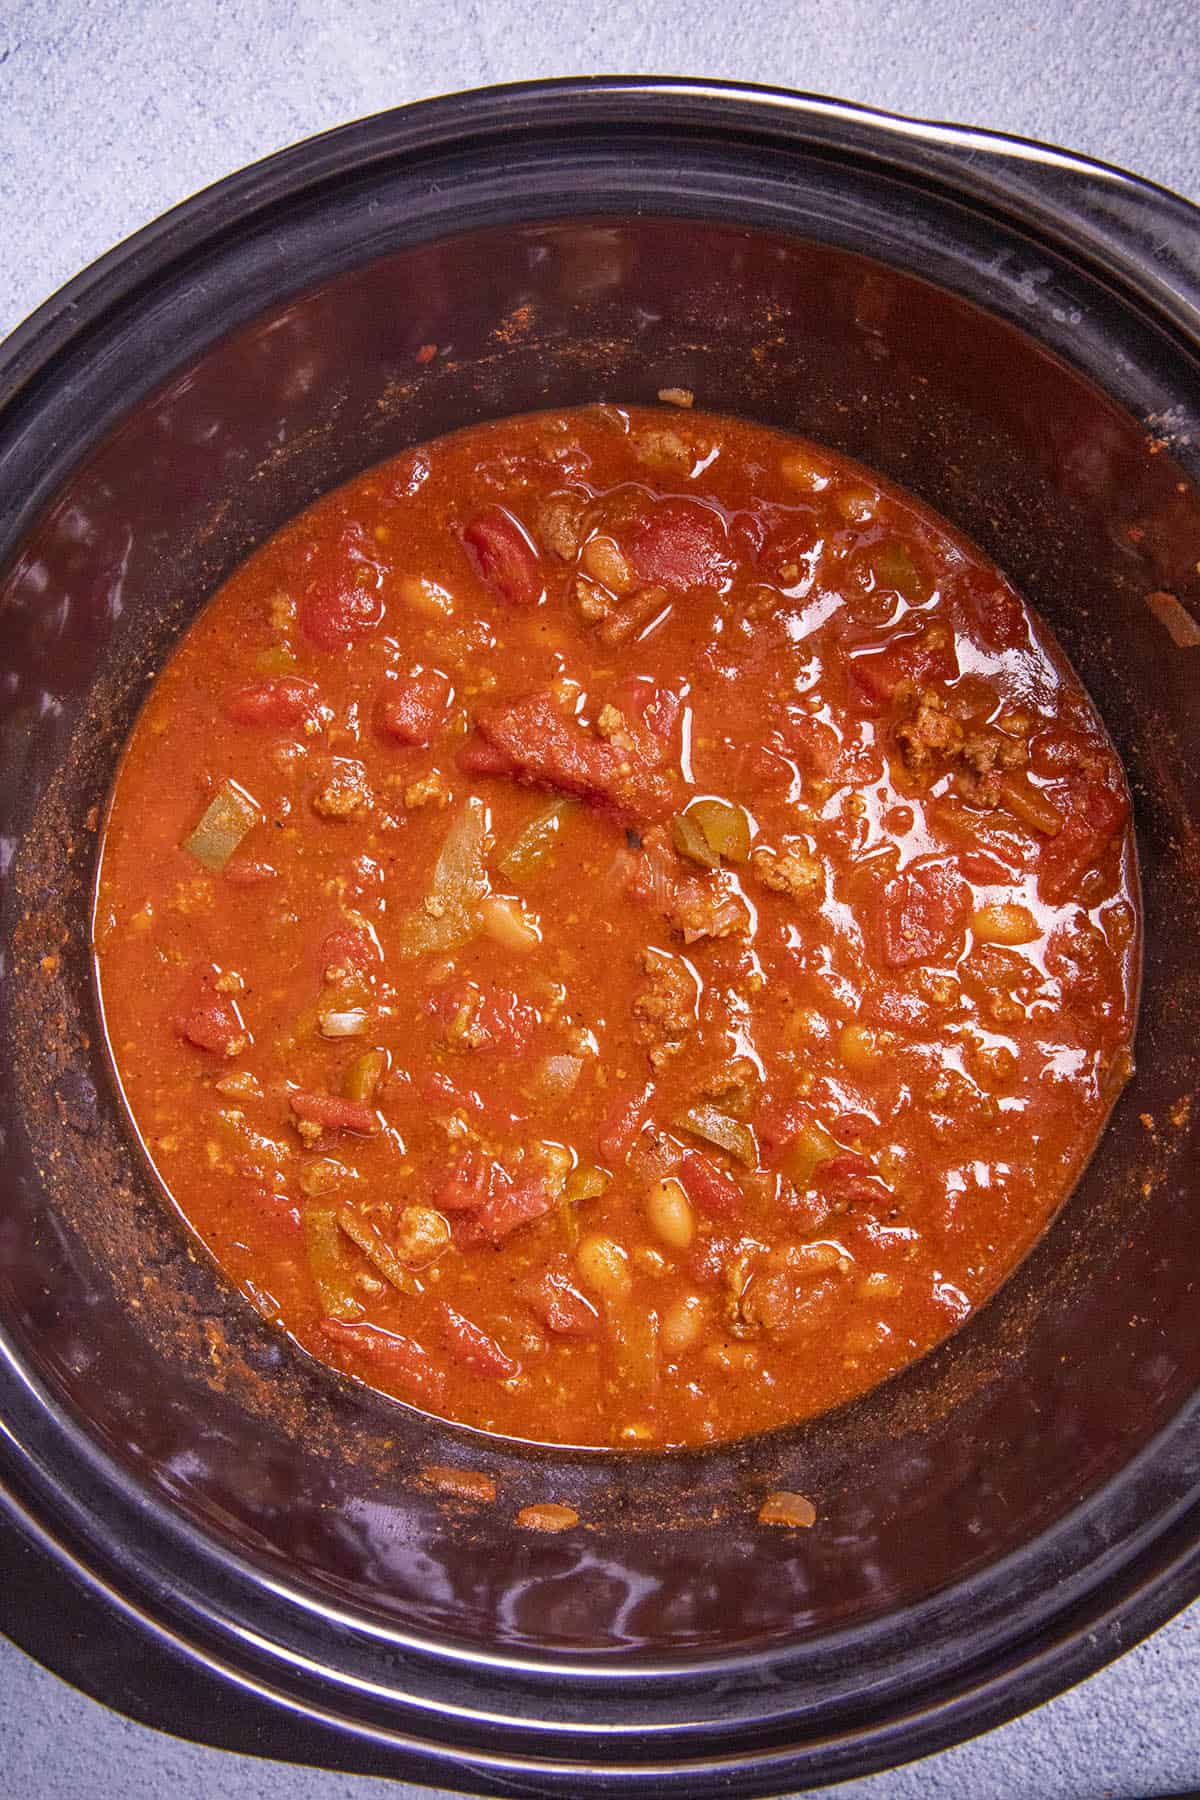 Crockpot Chili simmering in the slow cooker